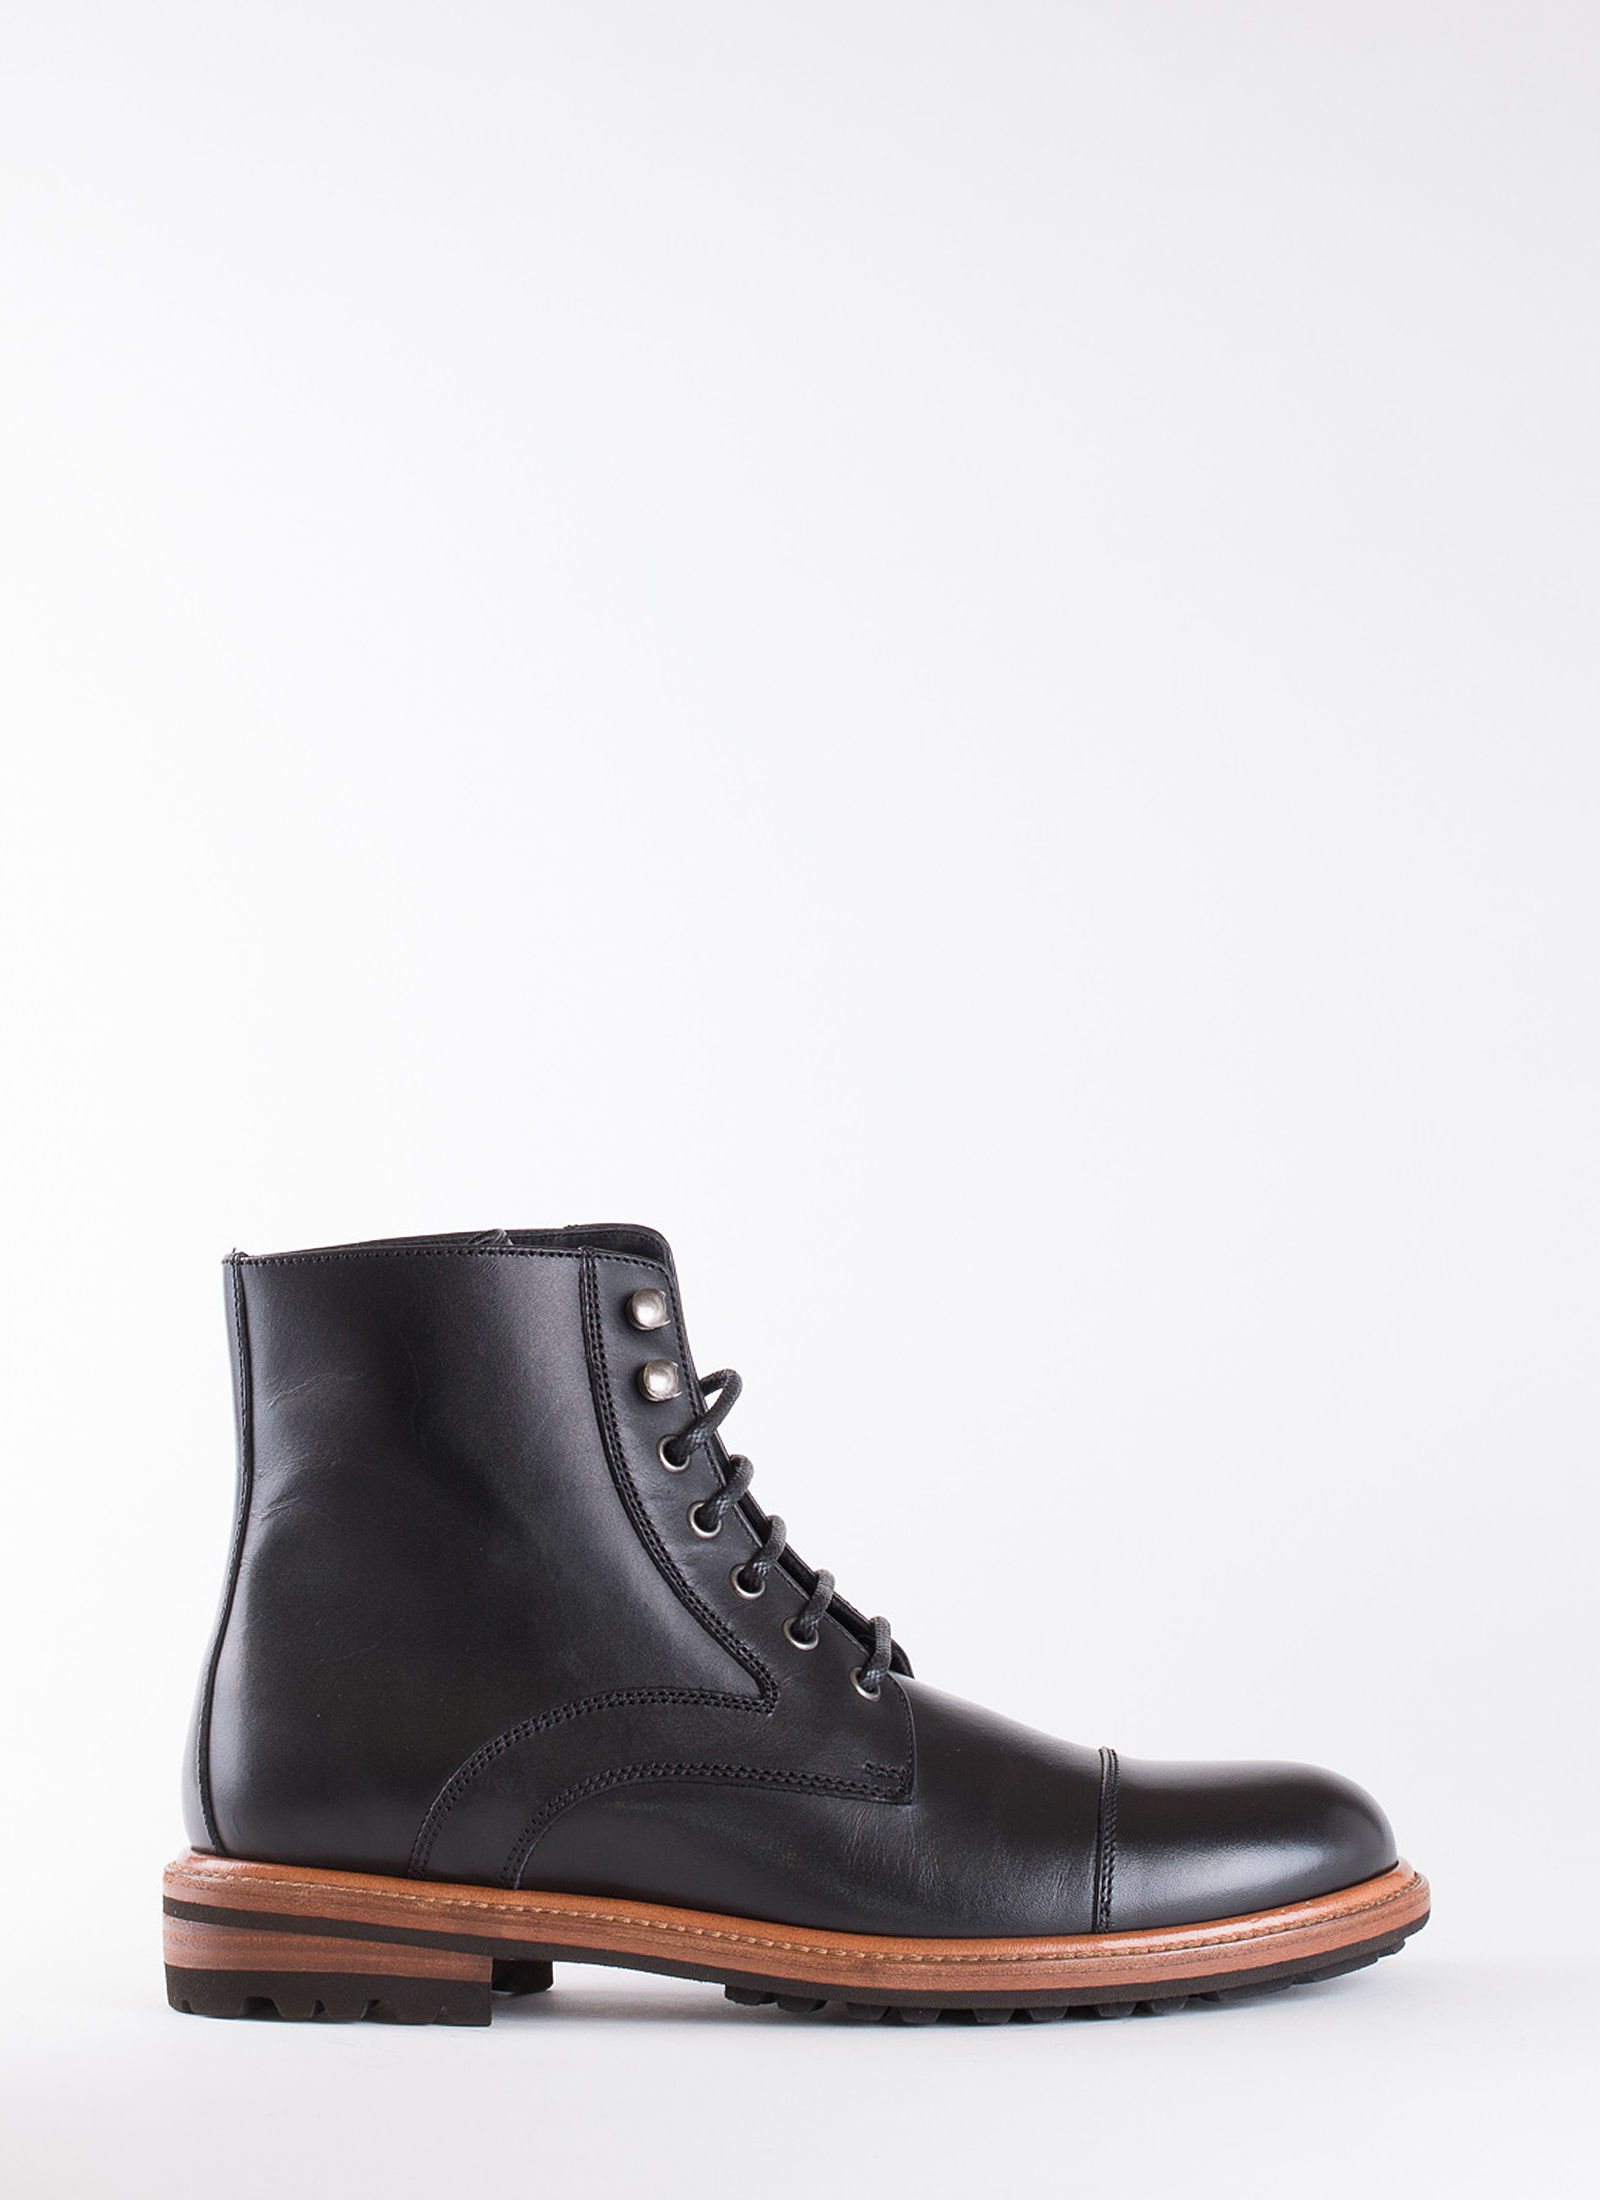 LEATHER BOOTS - DOLCE & GABBANA